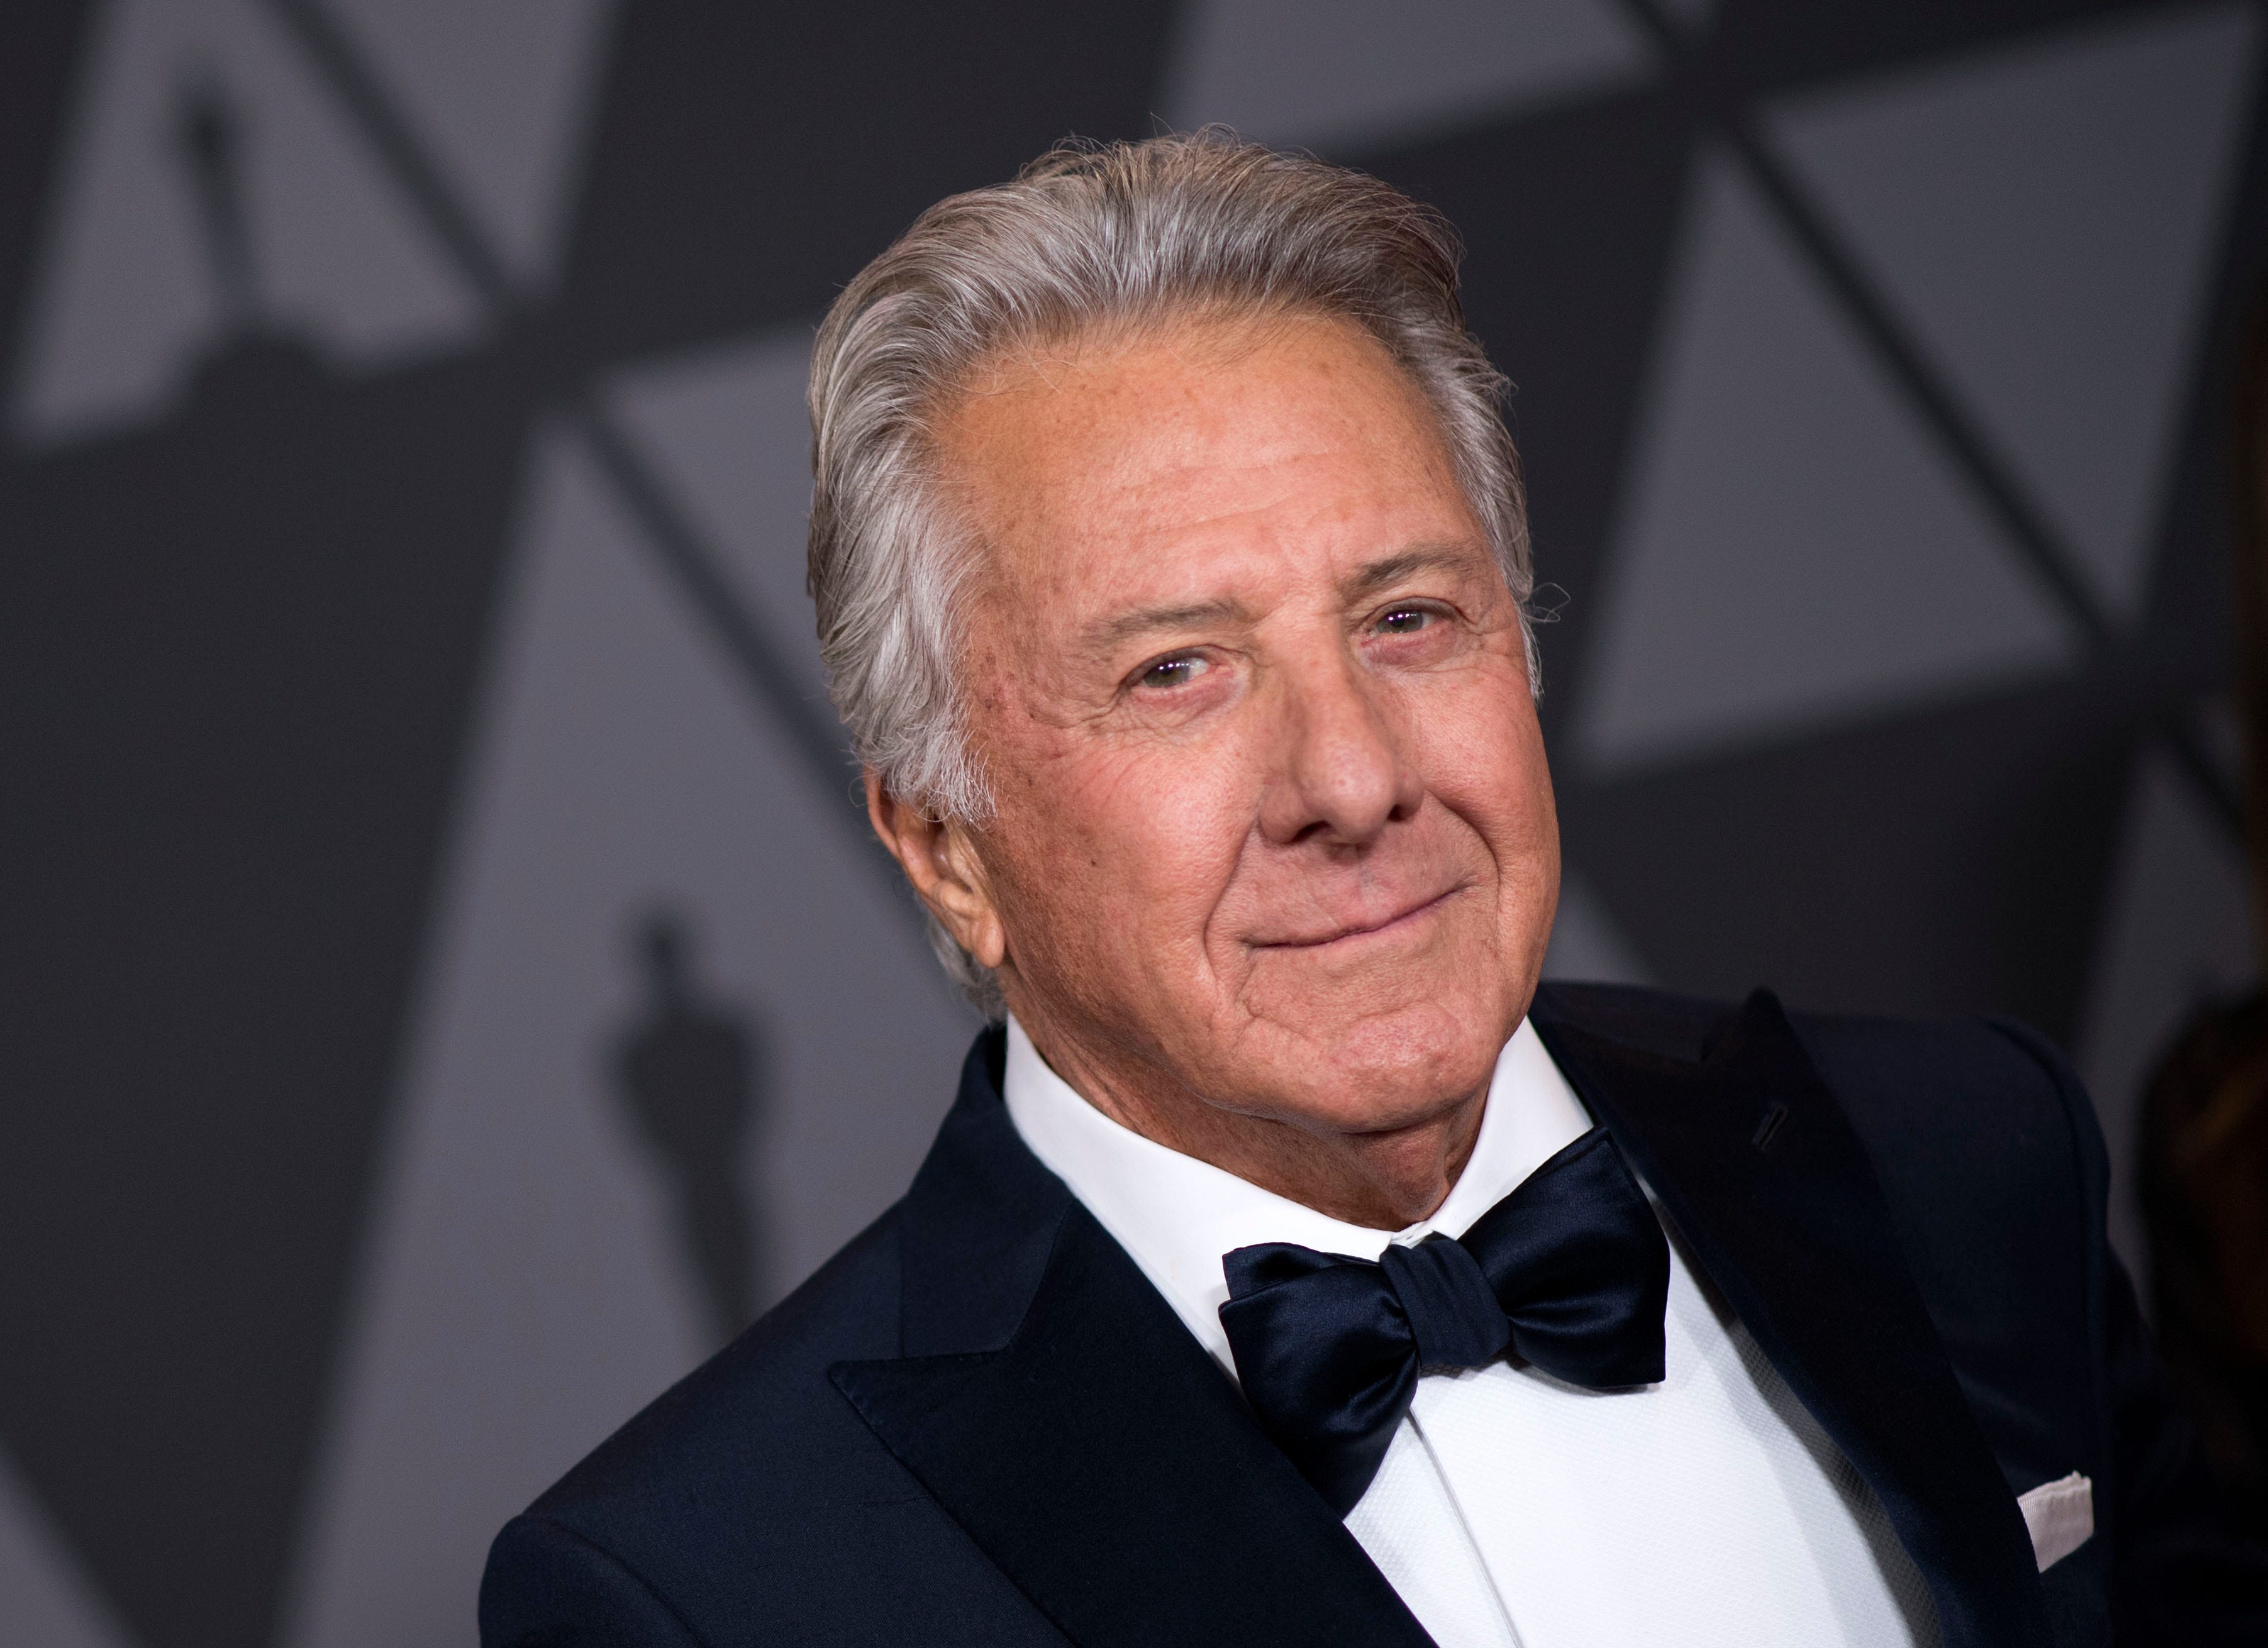 Five new accounts of sexual misconduct hit Dustin Hoffman